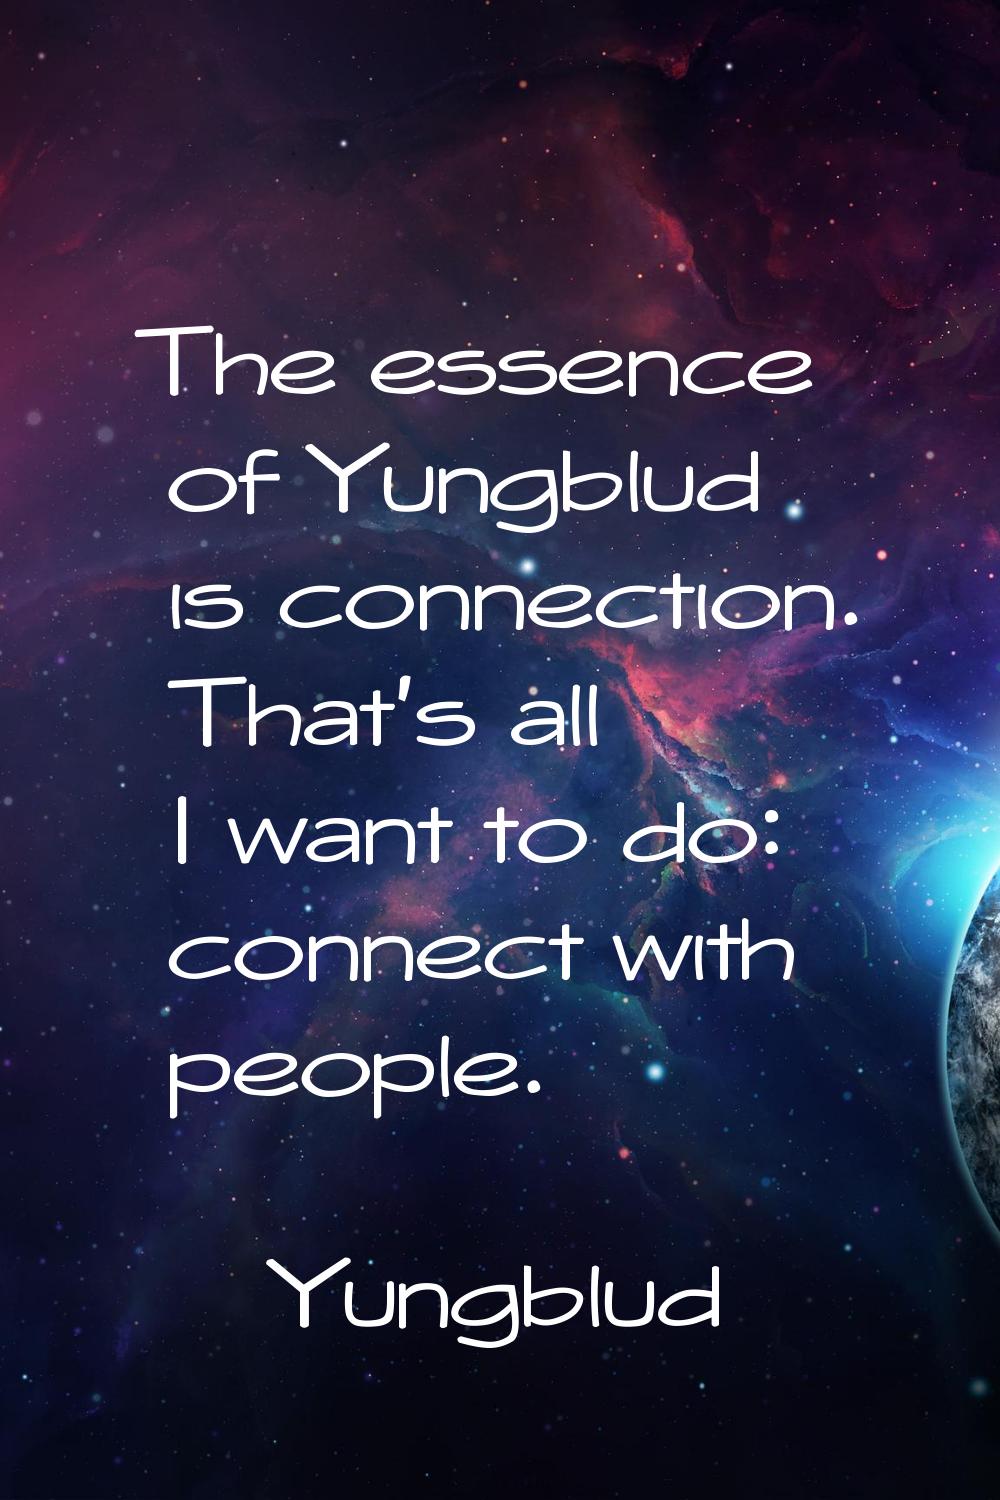 The essence of Yungblud is connection. That's all I want to do: connect with people.